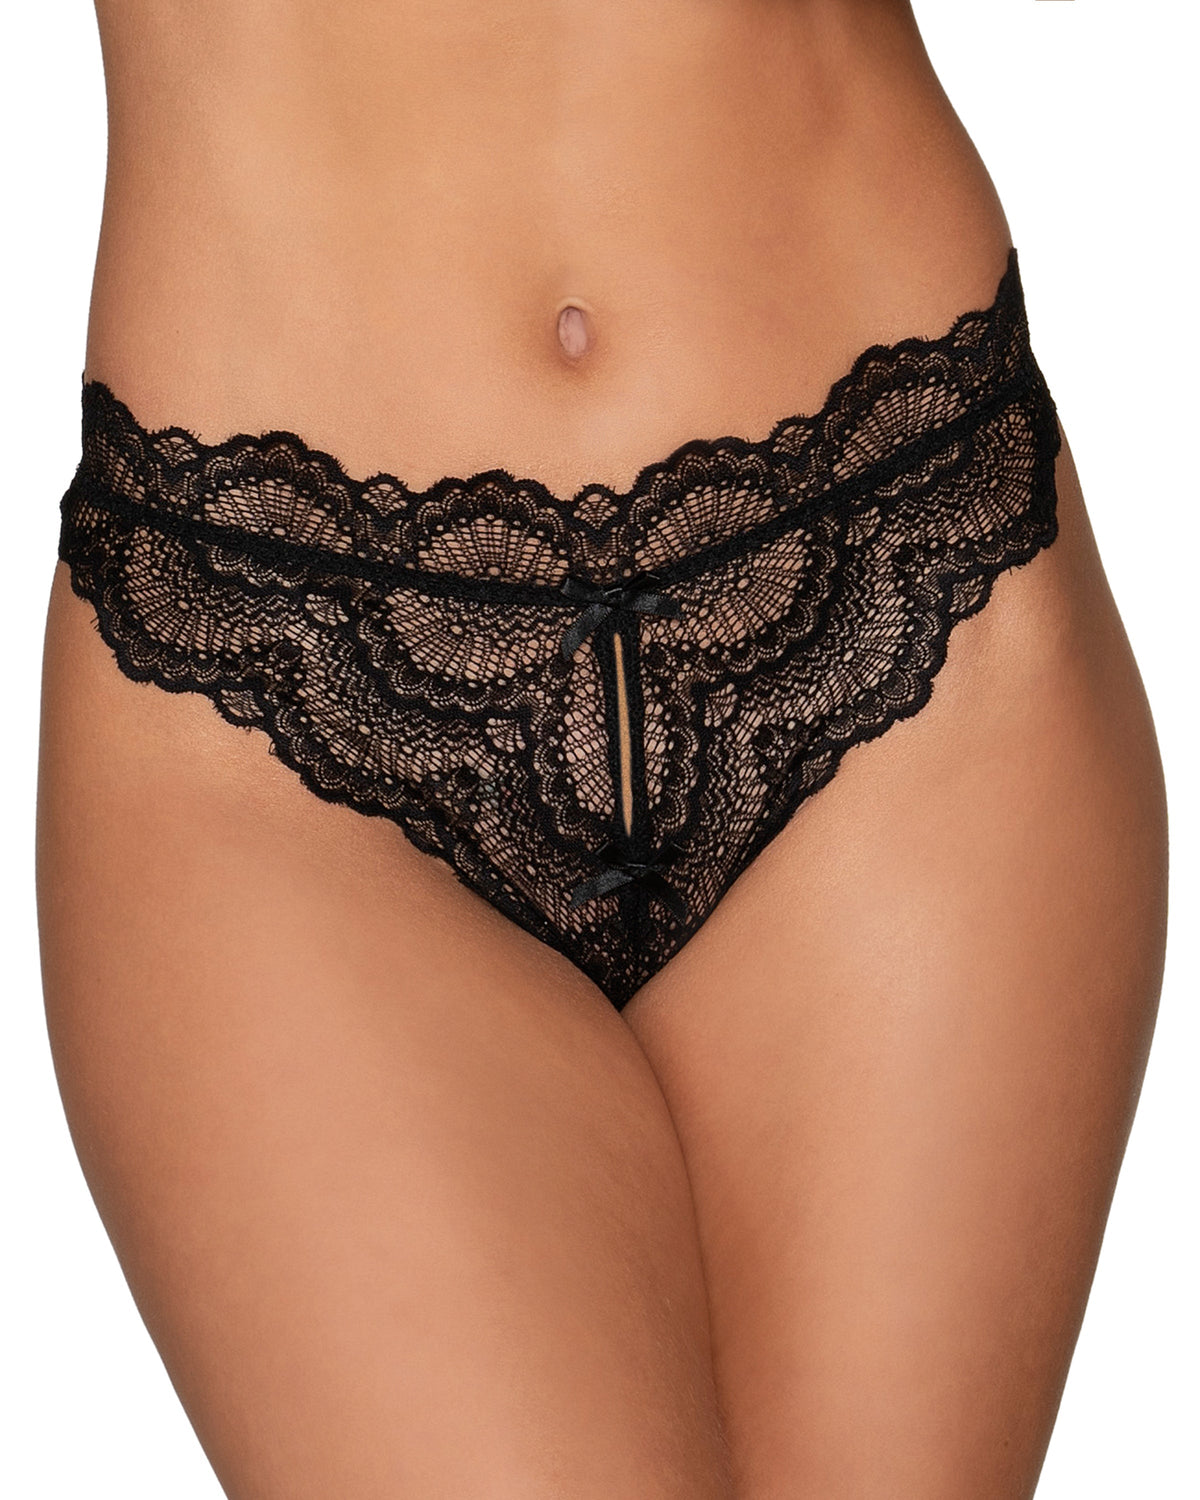 Lace Tanga Open Crotch Panty with Open Back Detail Panty Dreamgirl International 